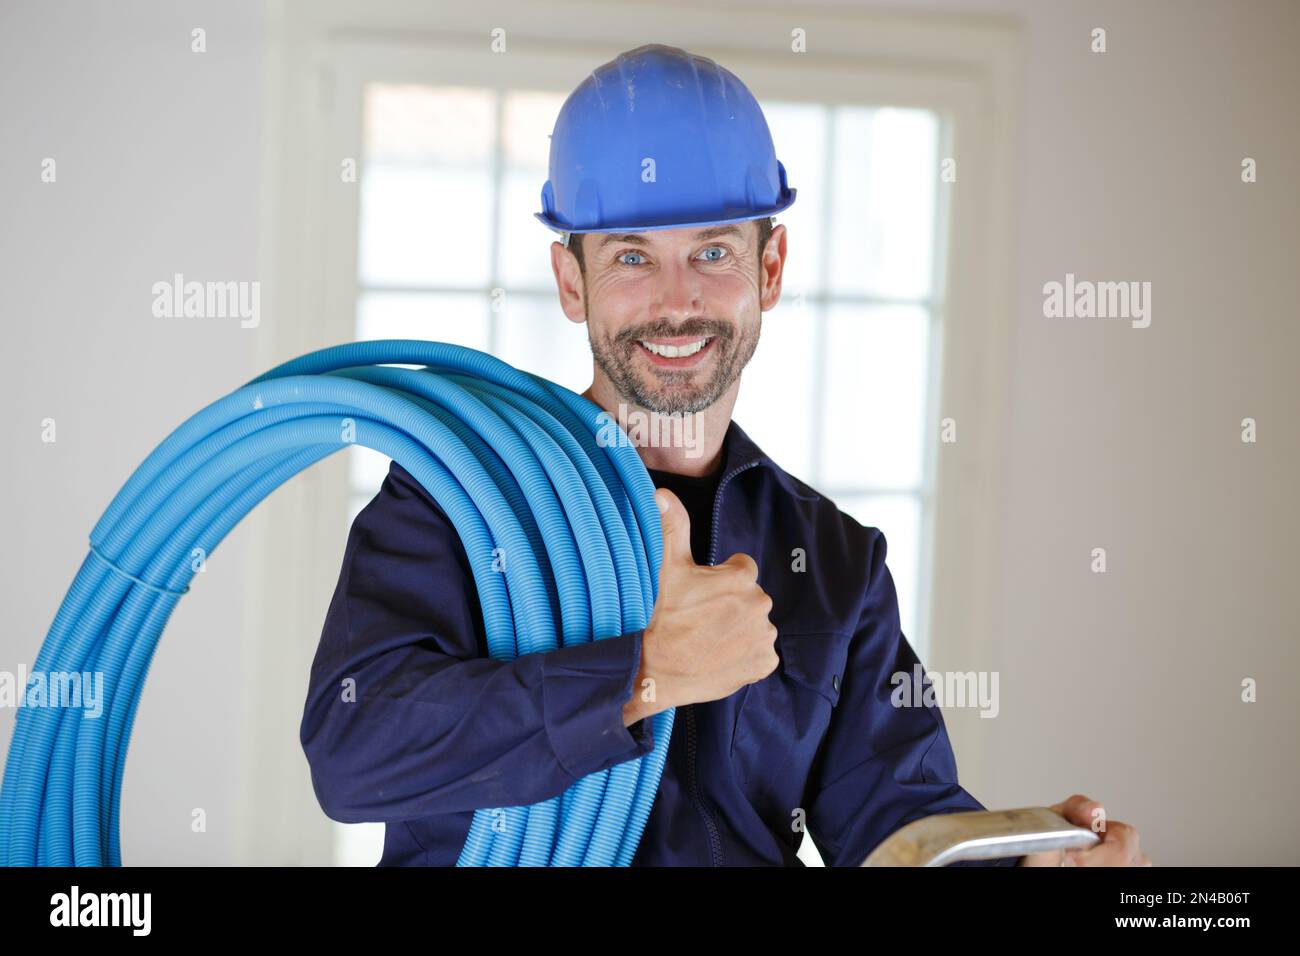 smiling builder indoors holding pipes Stock Photo